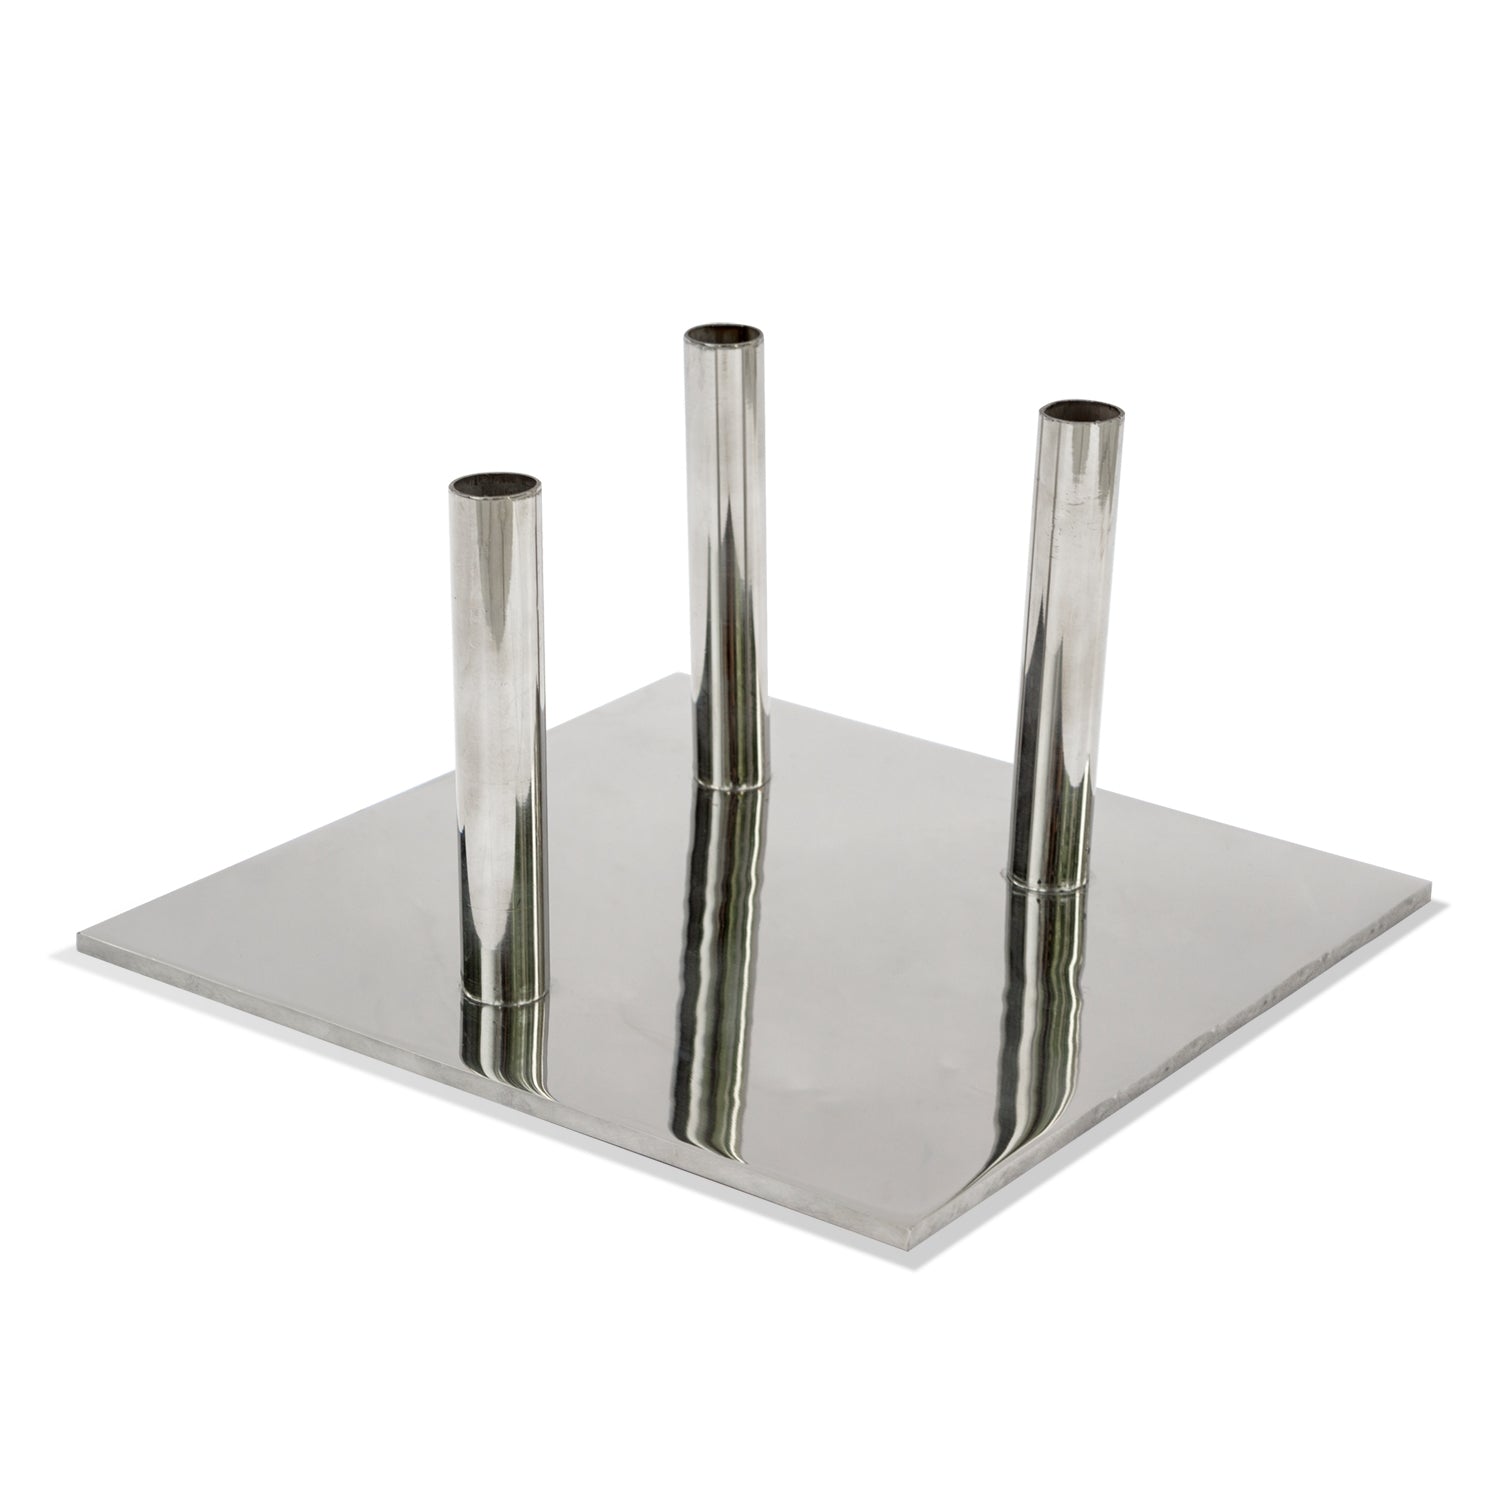 Base for Sculptures, Stainless Steel